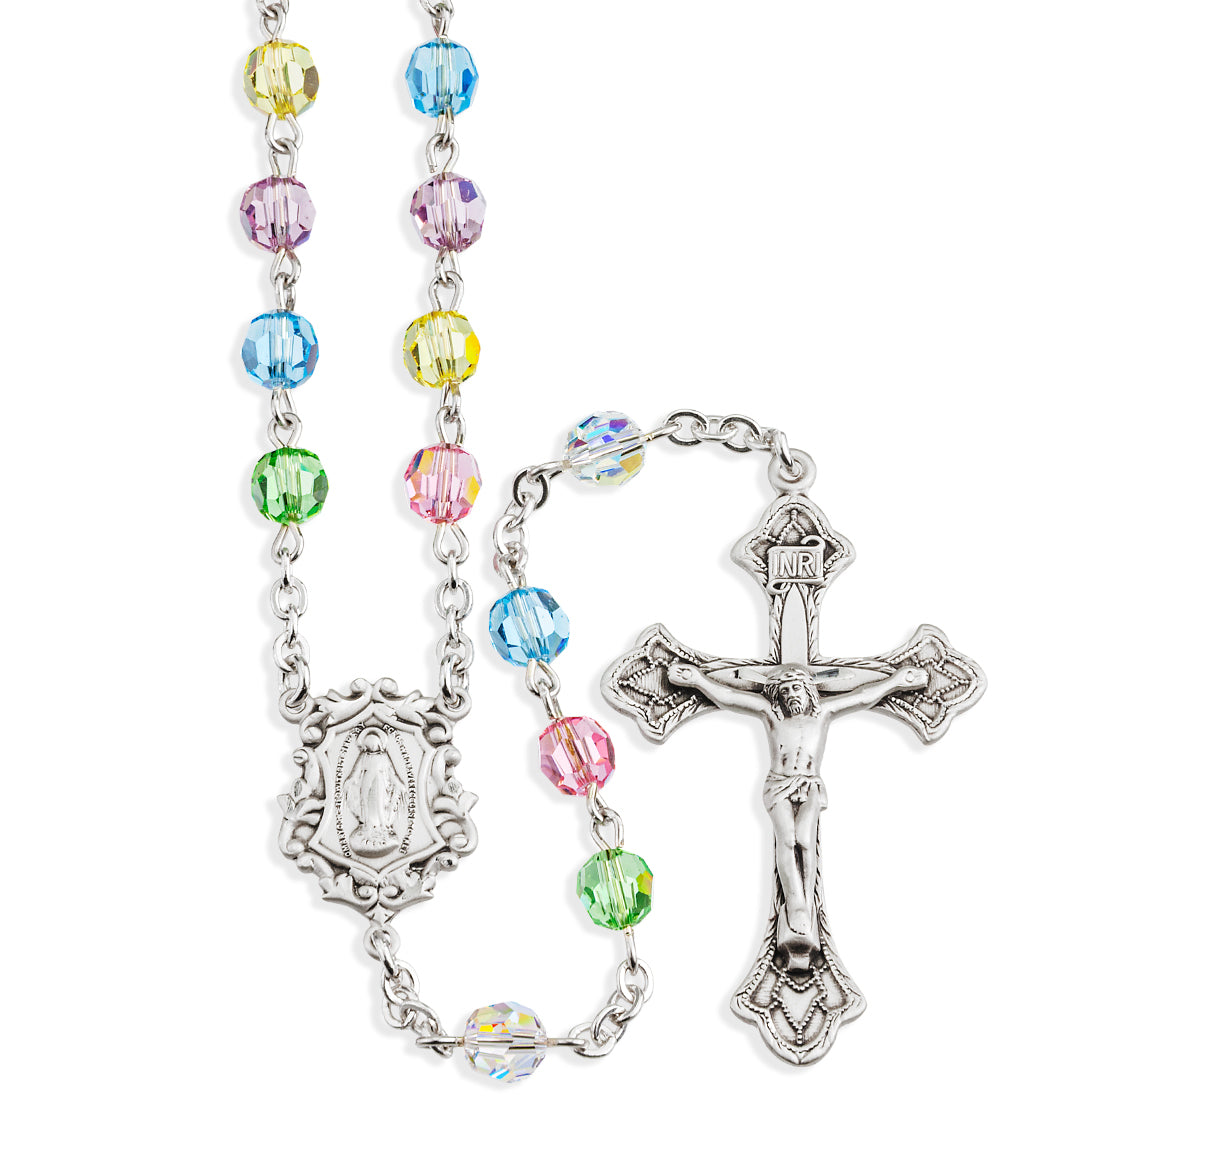 Sterling Silver Rosary Hand Made with Swarovski Crystal 6mm Multi-Color Faceted Round Beads by HMH